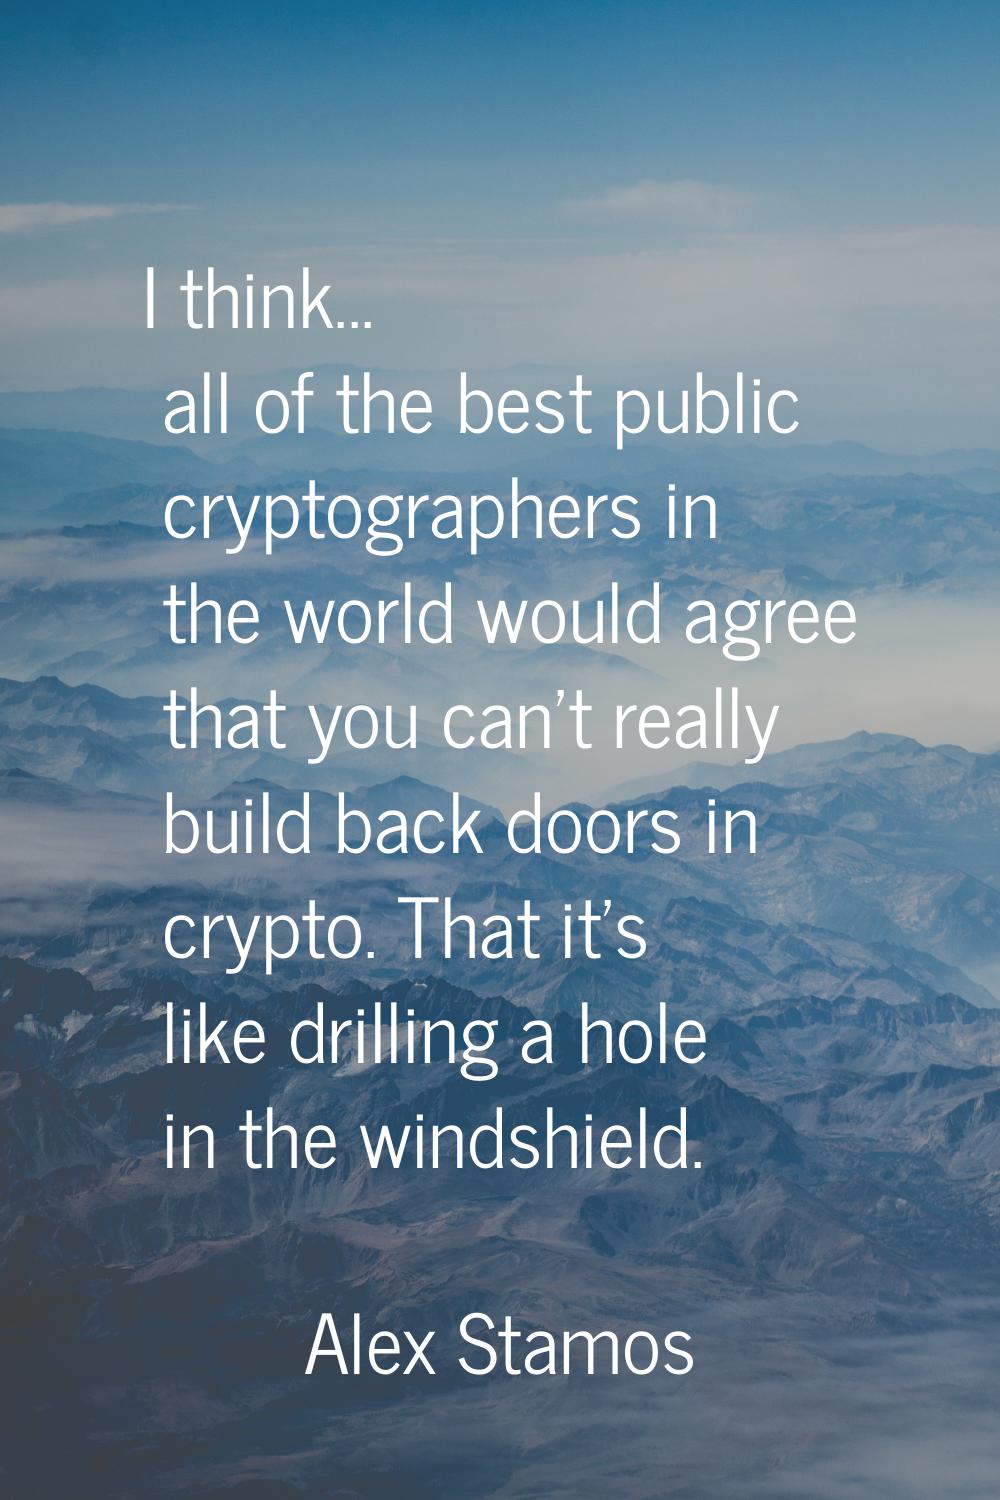 I think... all of the best public cryptographers in the world would agree that you can't really bui